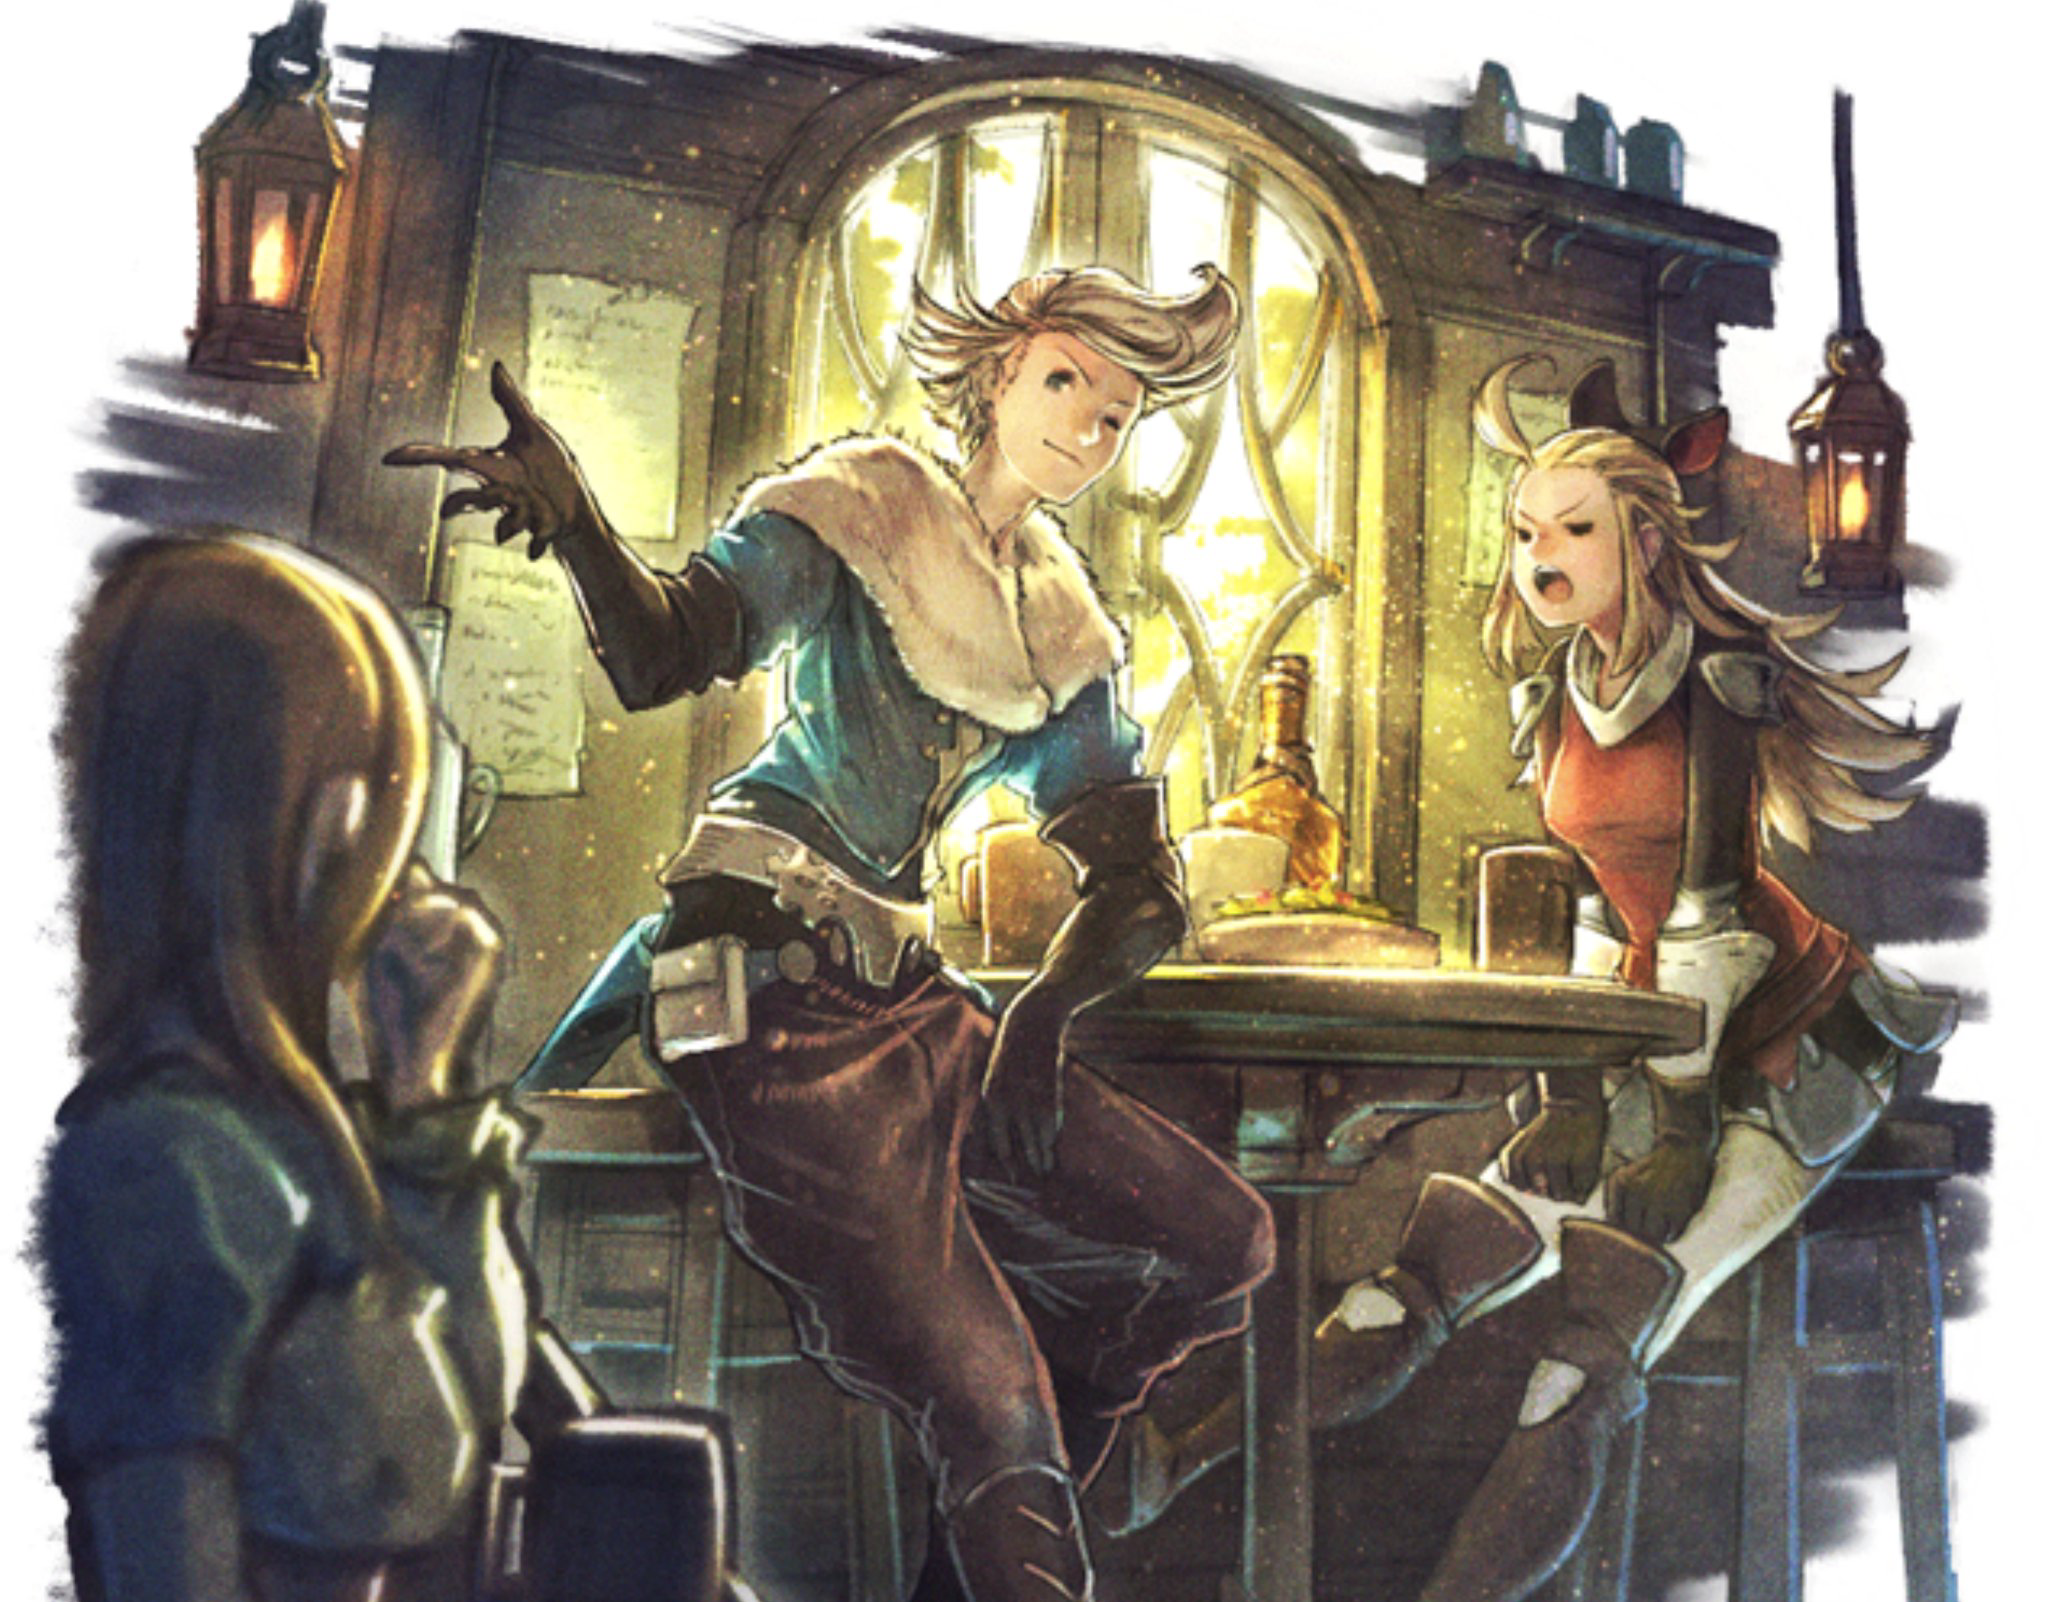 Octopath Traveler: Champions of the Continent Bravely Default Collab Reveals New Ringabel & Gloria Art